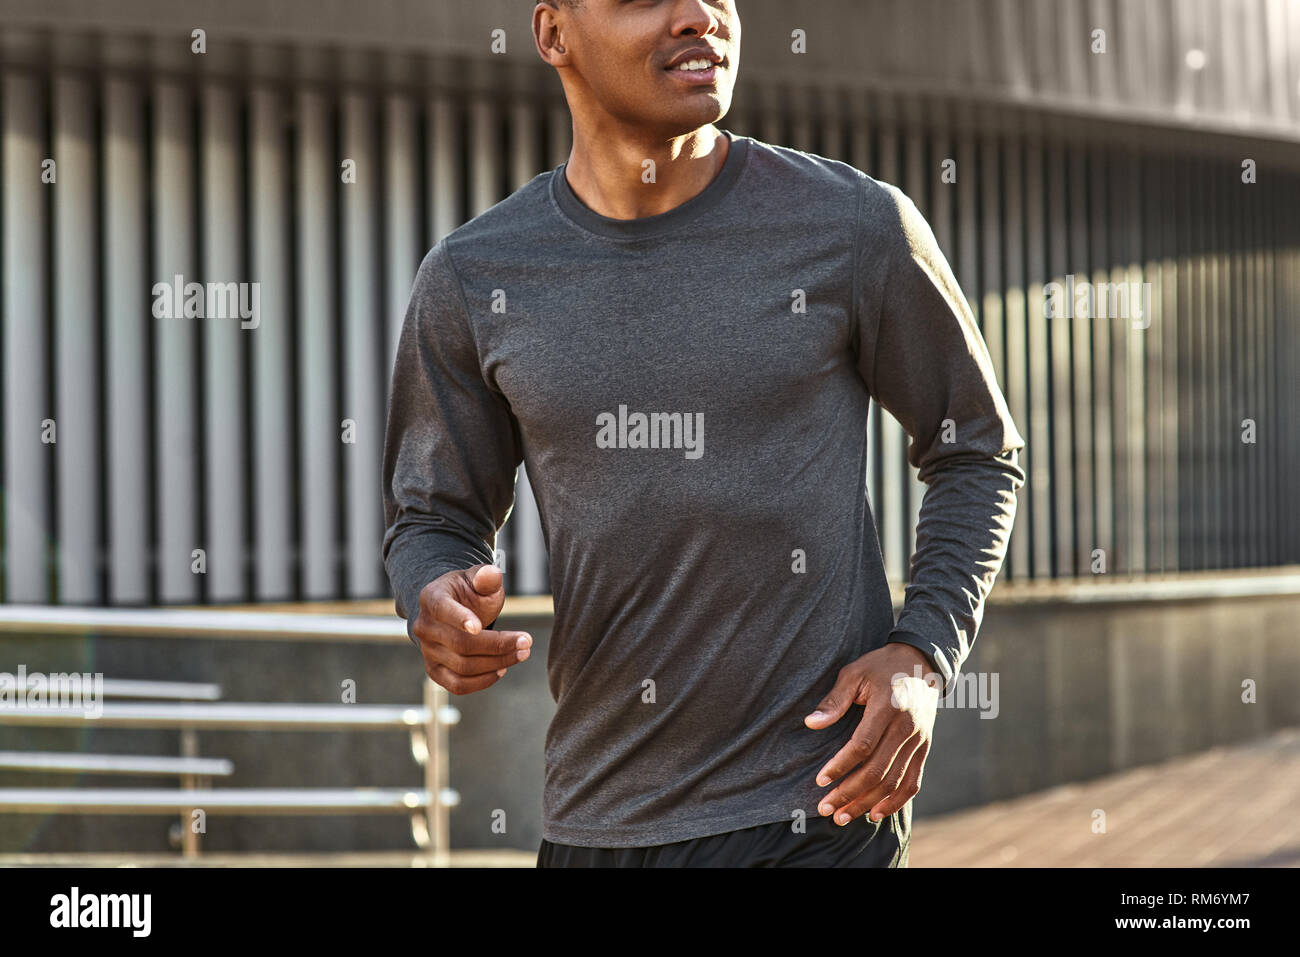 Happy to be healthy. Close-up portrait of handsome and positive african man in sportswear starting to run during his morning workout. Cardio training. Urban workout. Sport motivation concept. Stock Photo